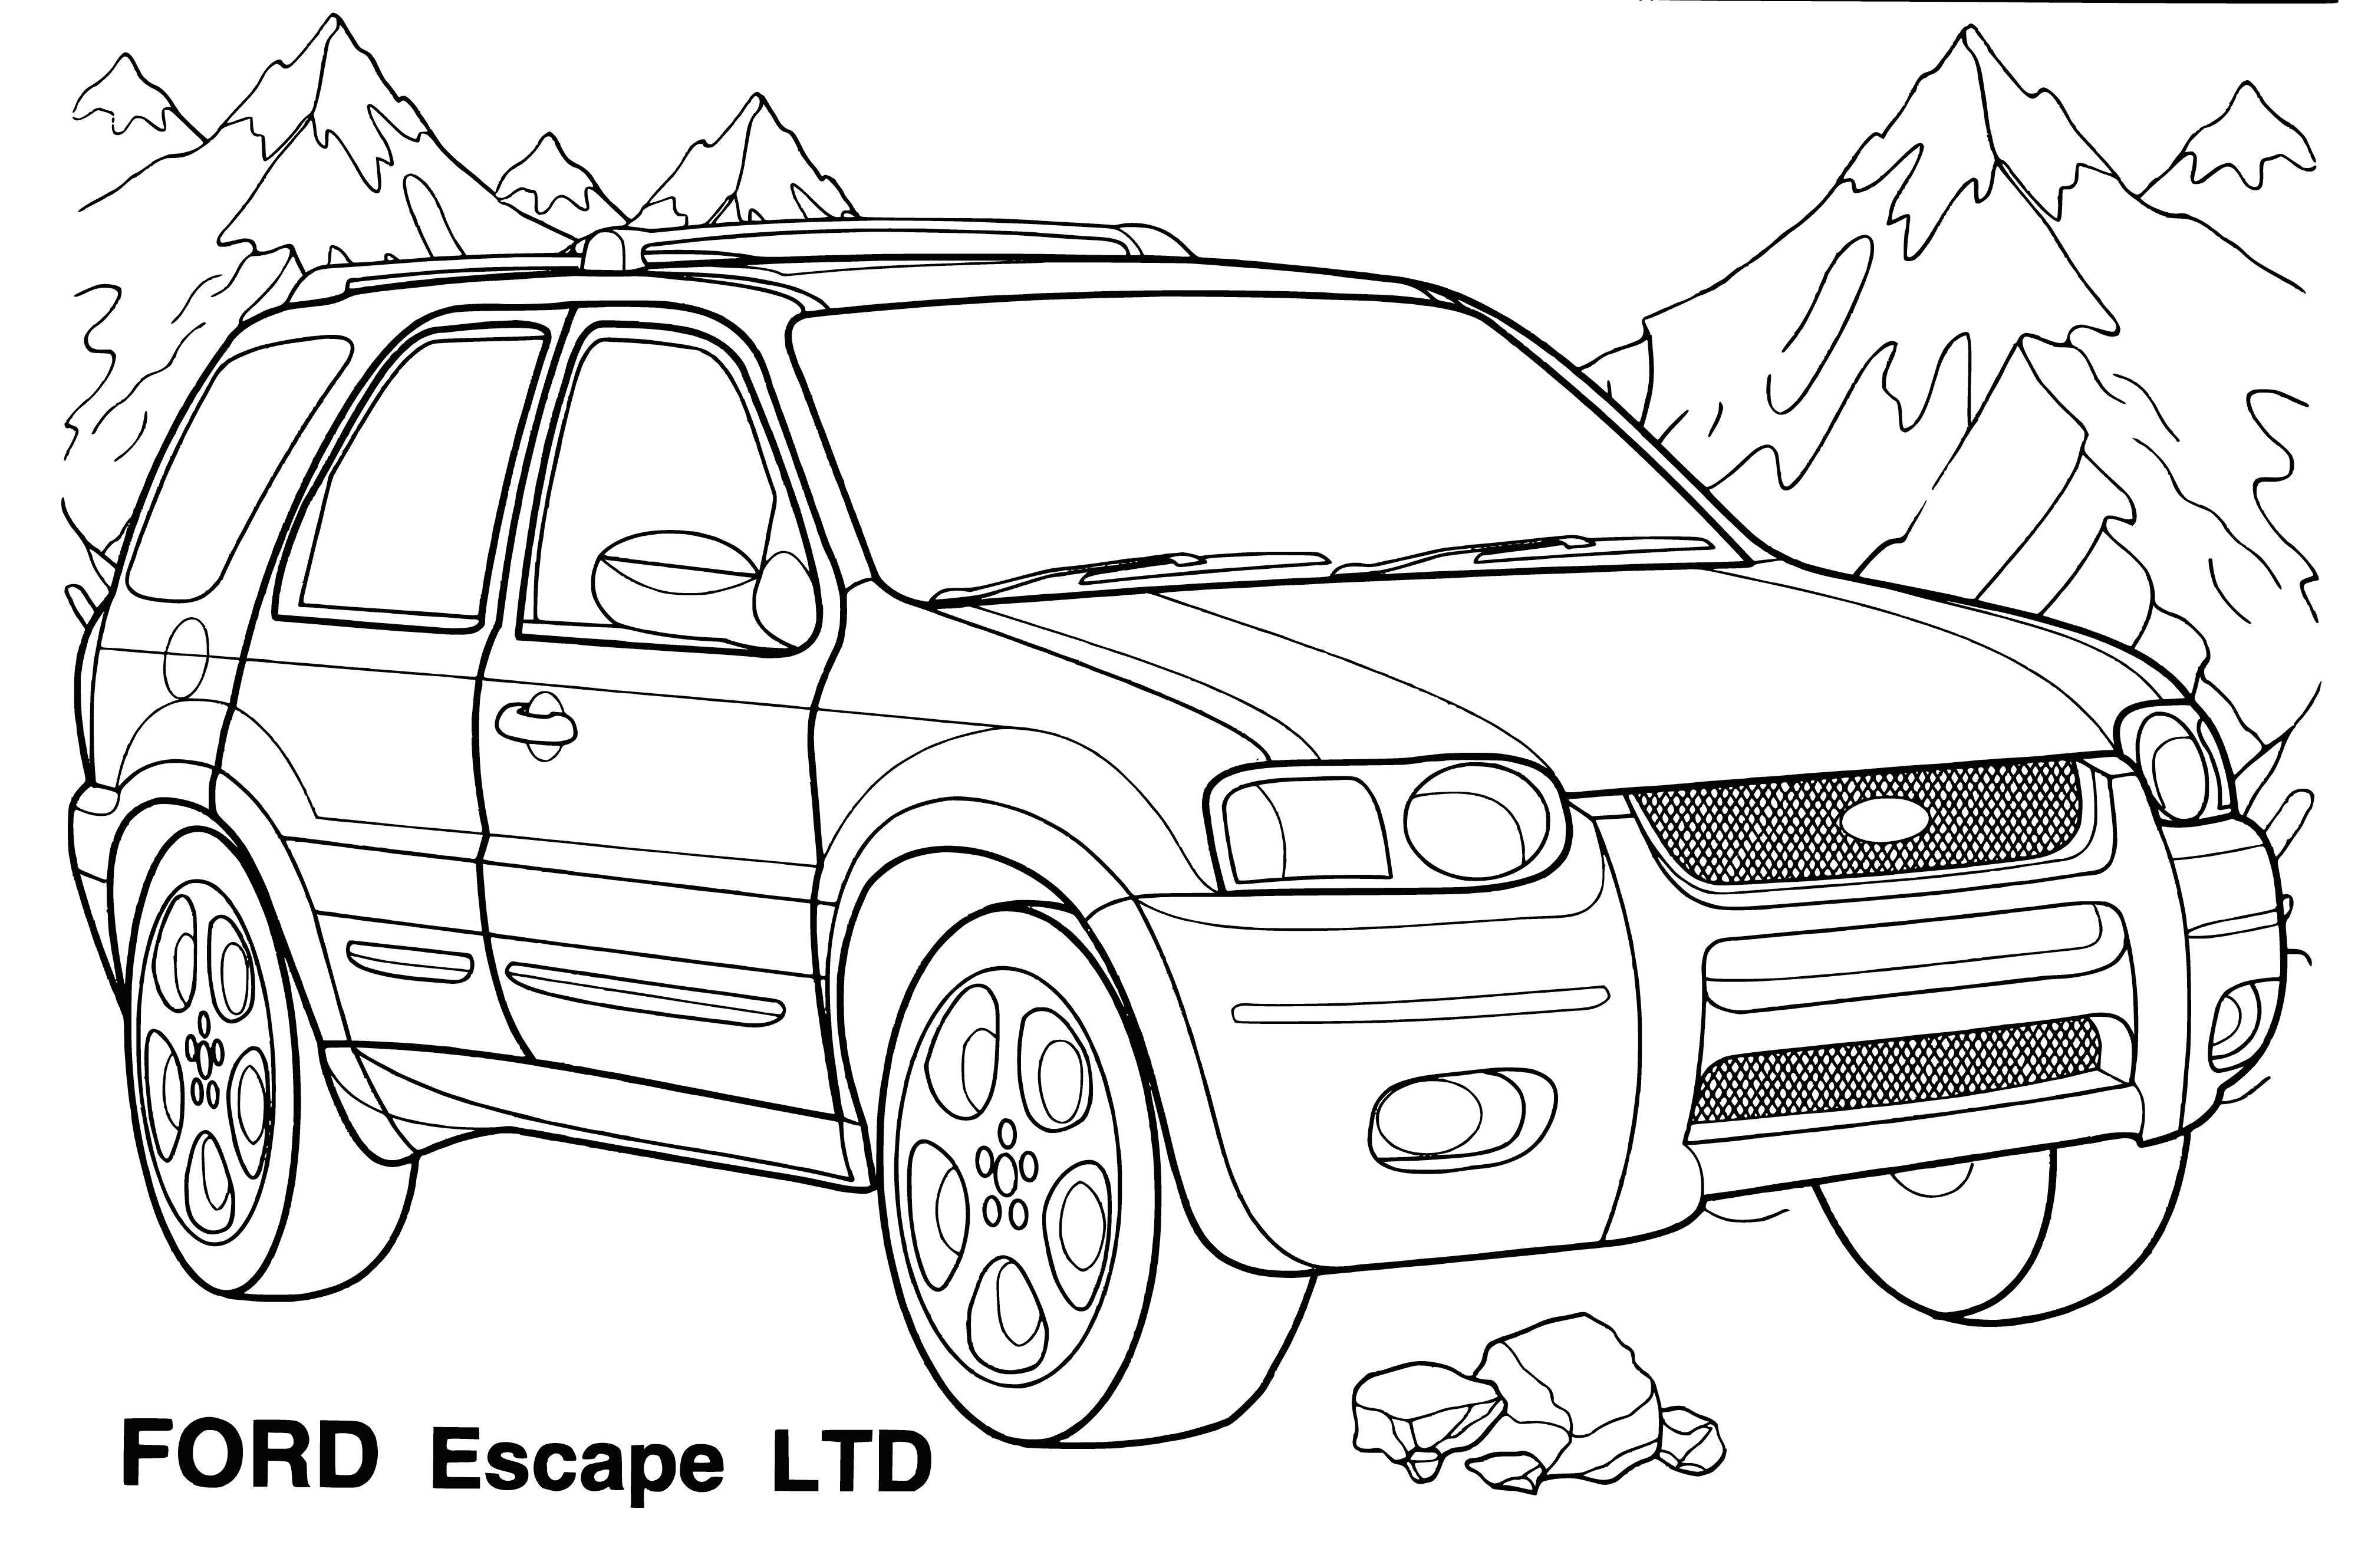 coloring page: Two silver jeeps in parking lot with doors open, each with a person inside. #coloringpage